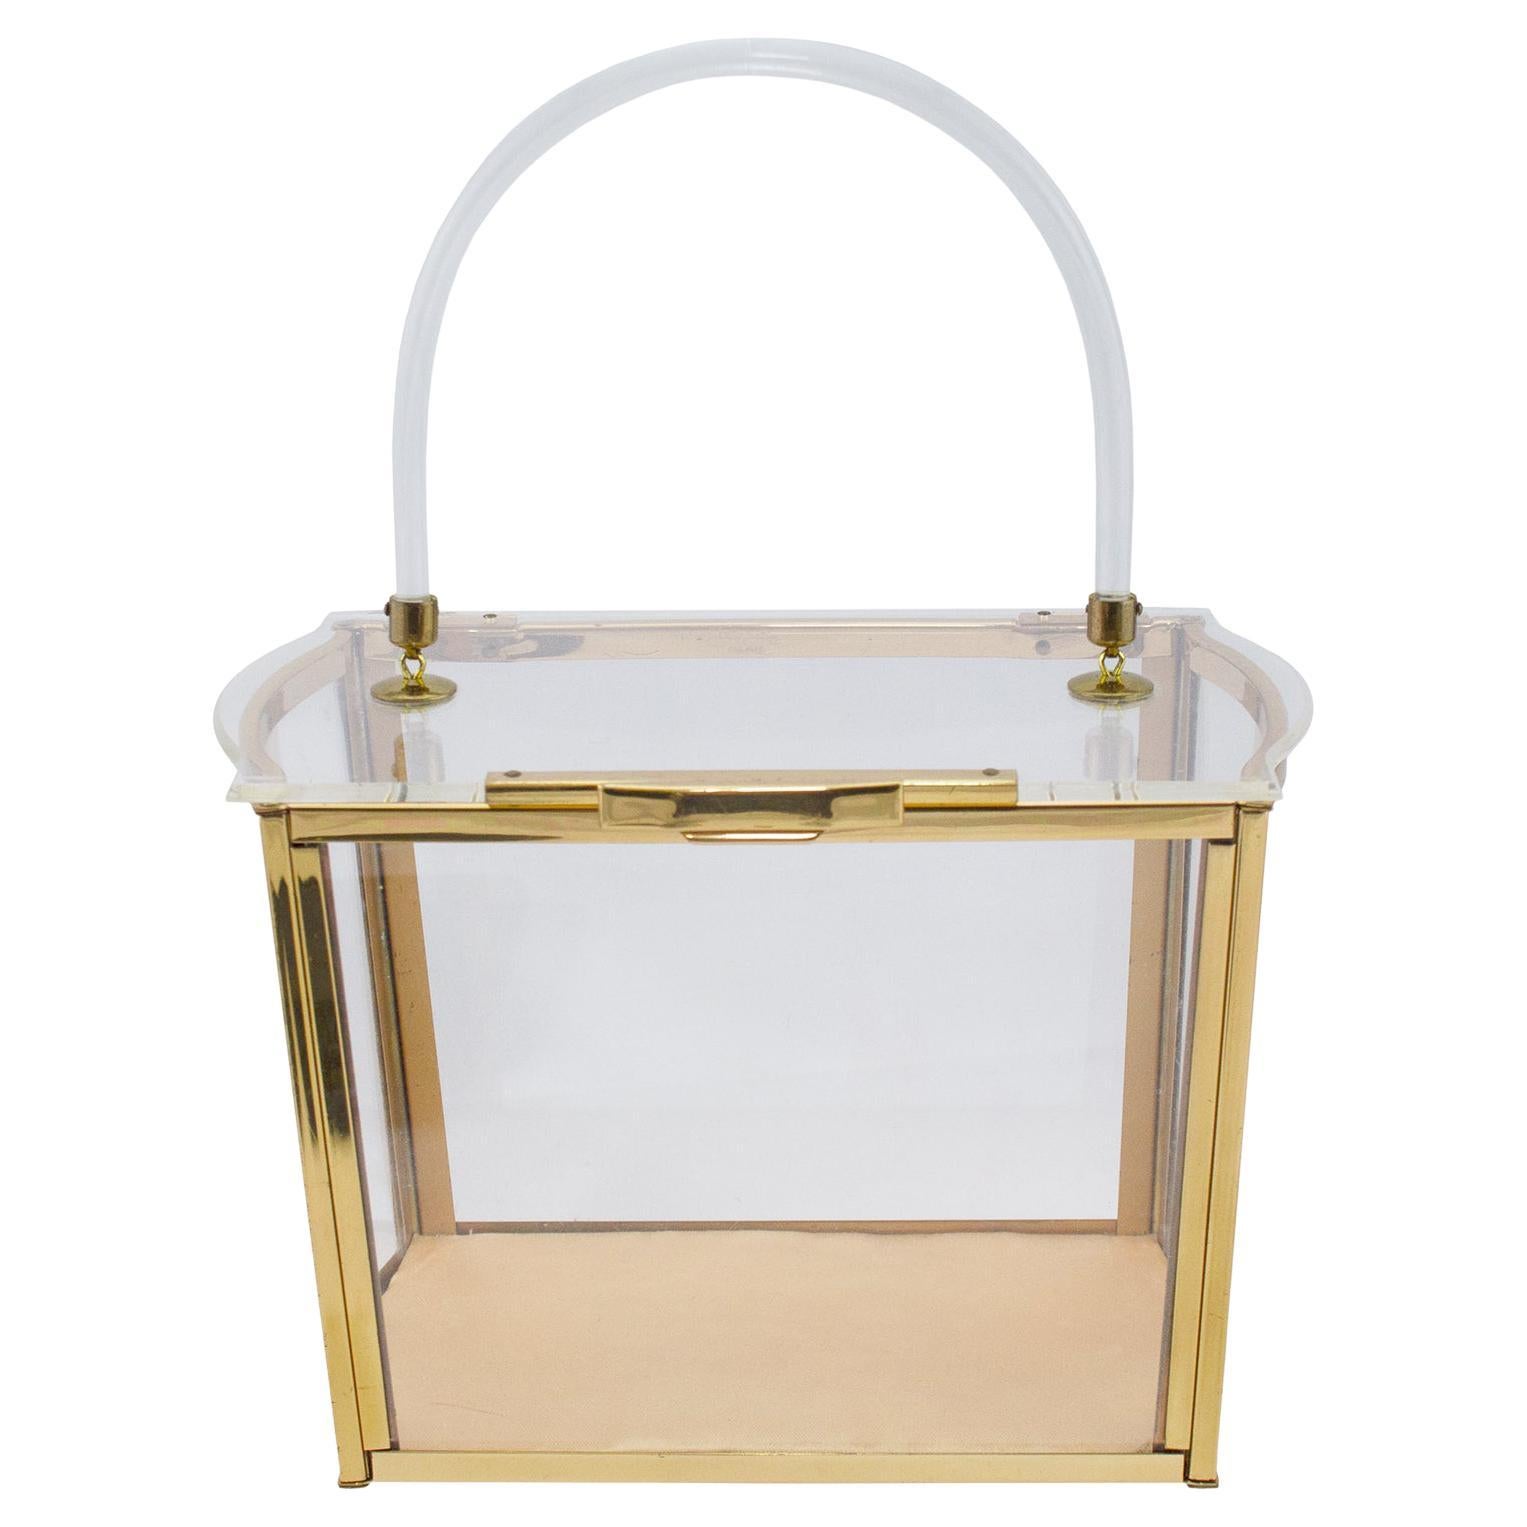 Lucite 1950's Handbag by Majestic